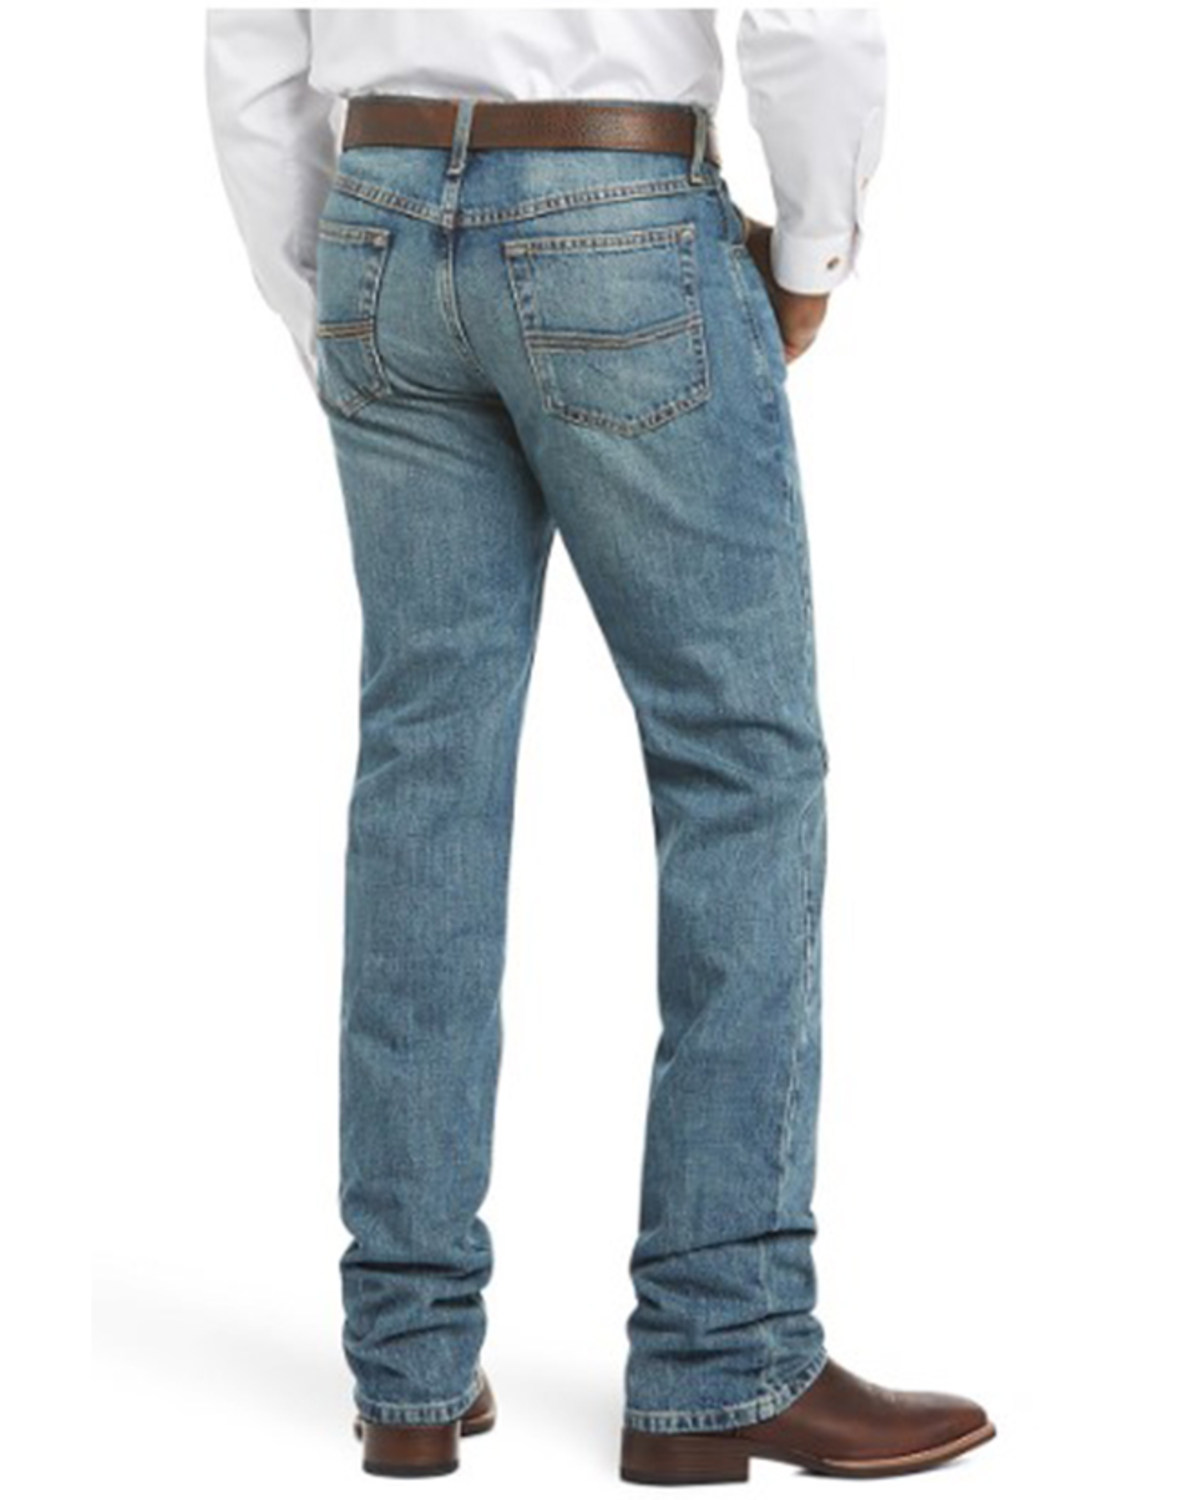 Ariat Men's M2 Relaxed Fit Jeans